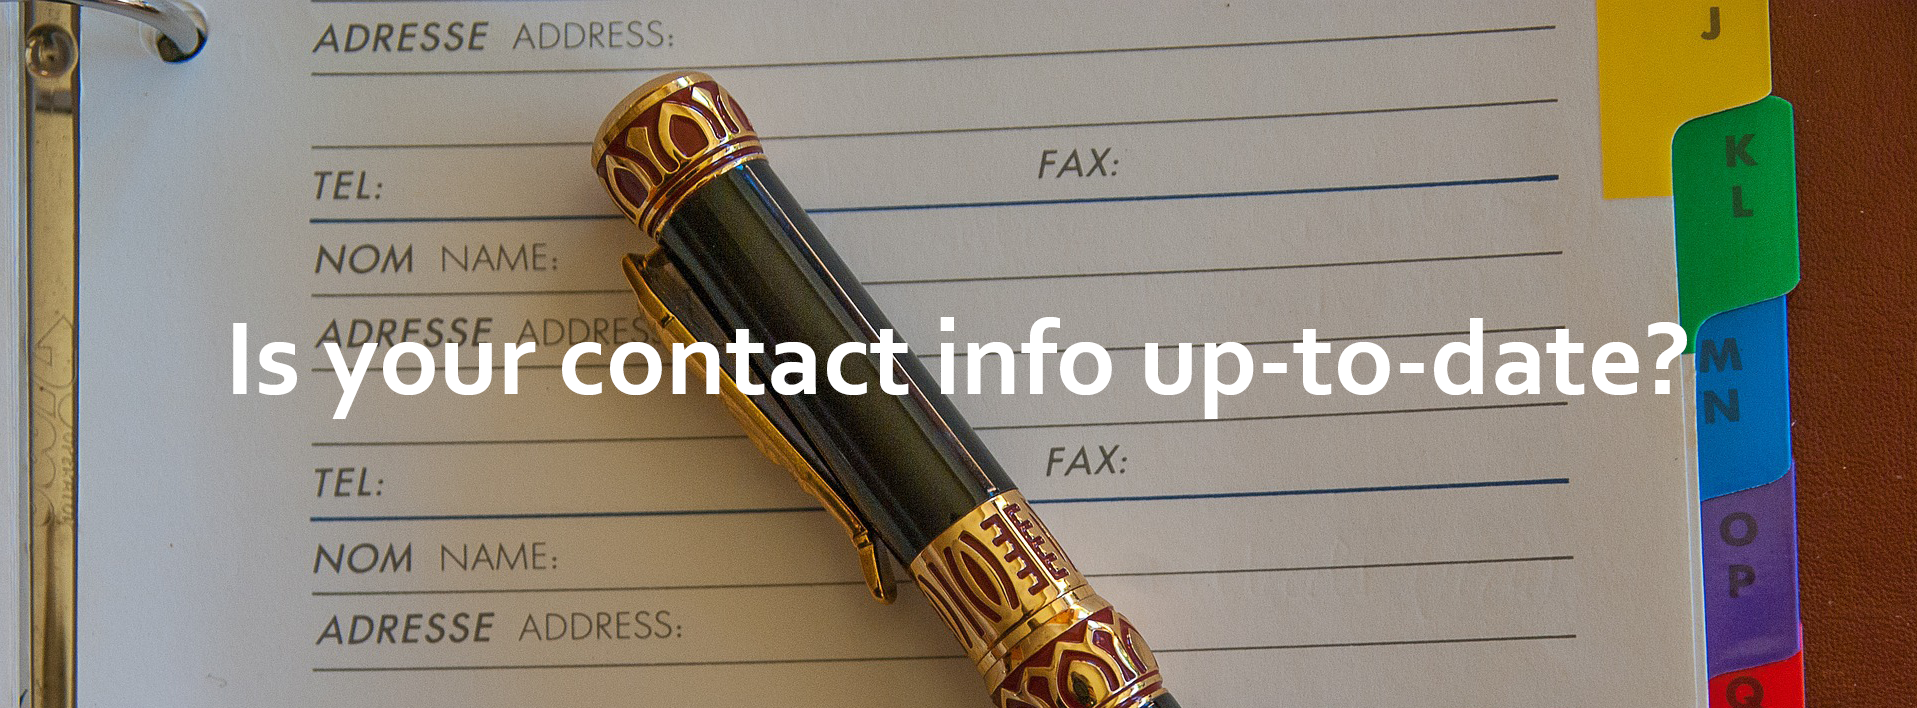 Is your contact info up-to-date?